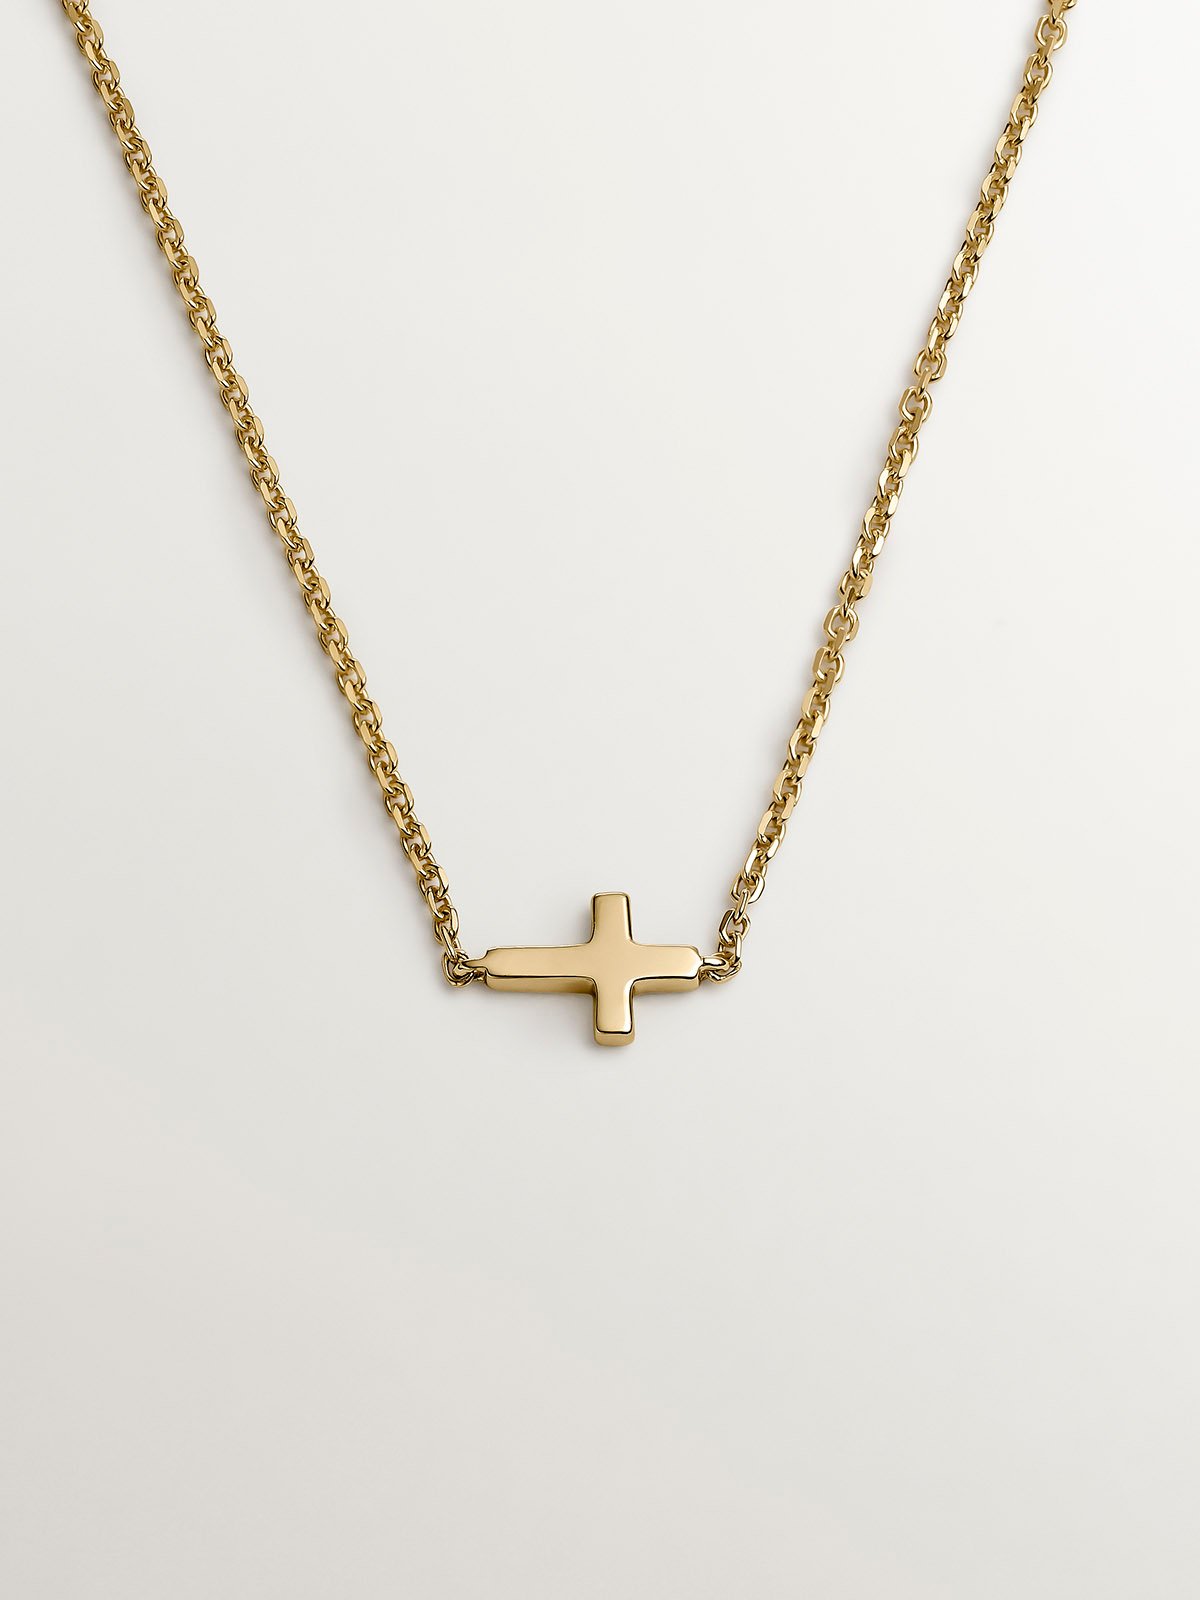 9K Yellow Gold Chain with Cross